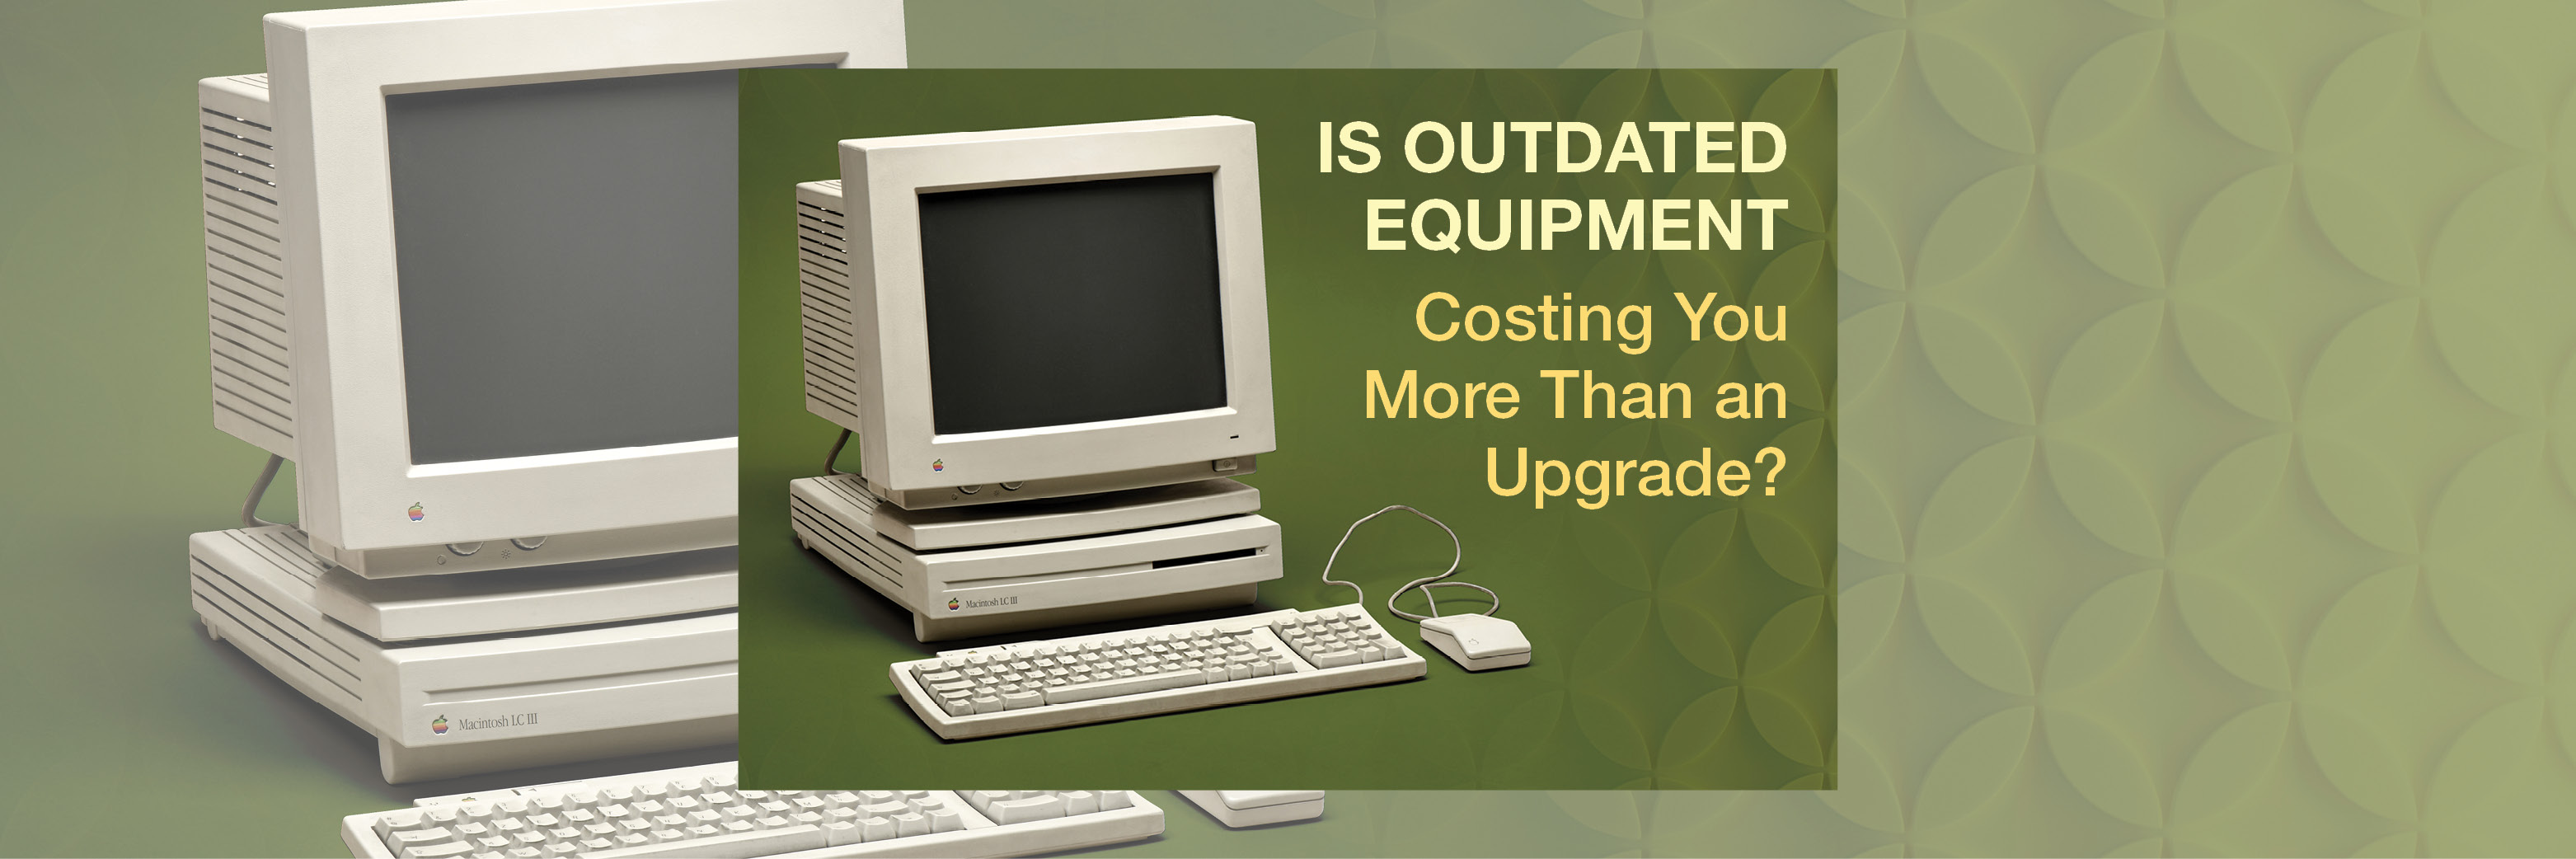 Is Outdated Equipment Costing You More than an Upgrade?